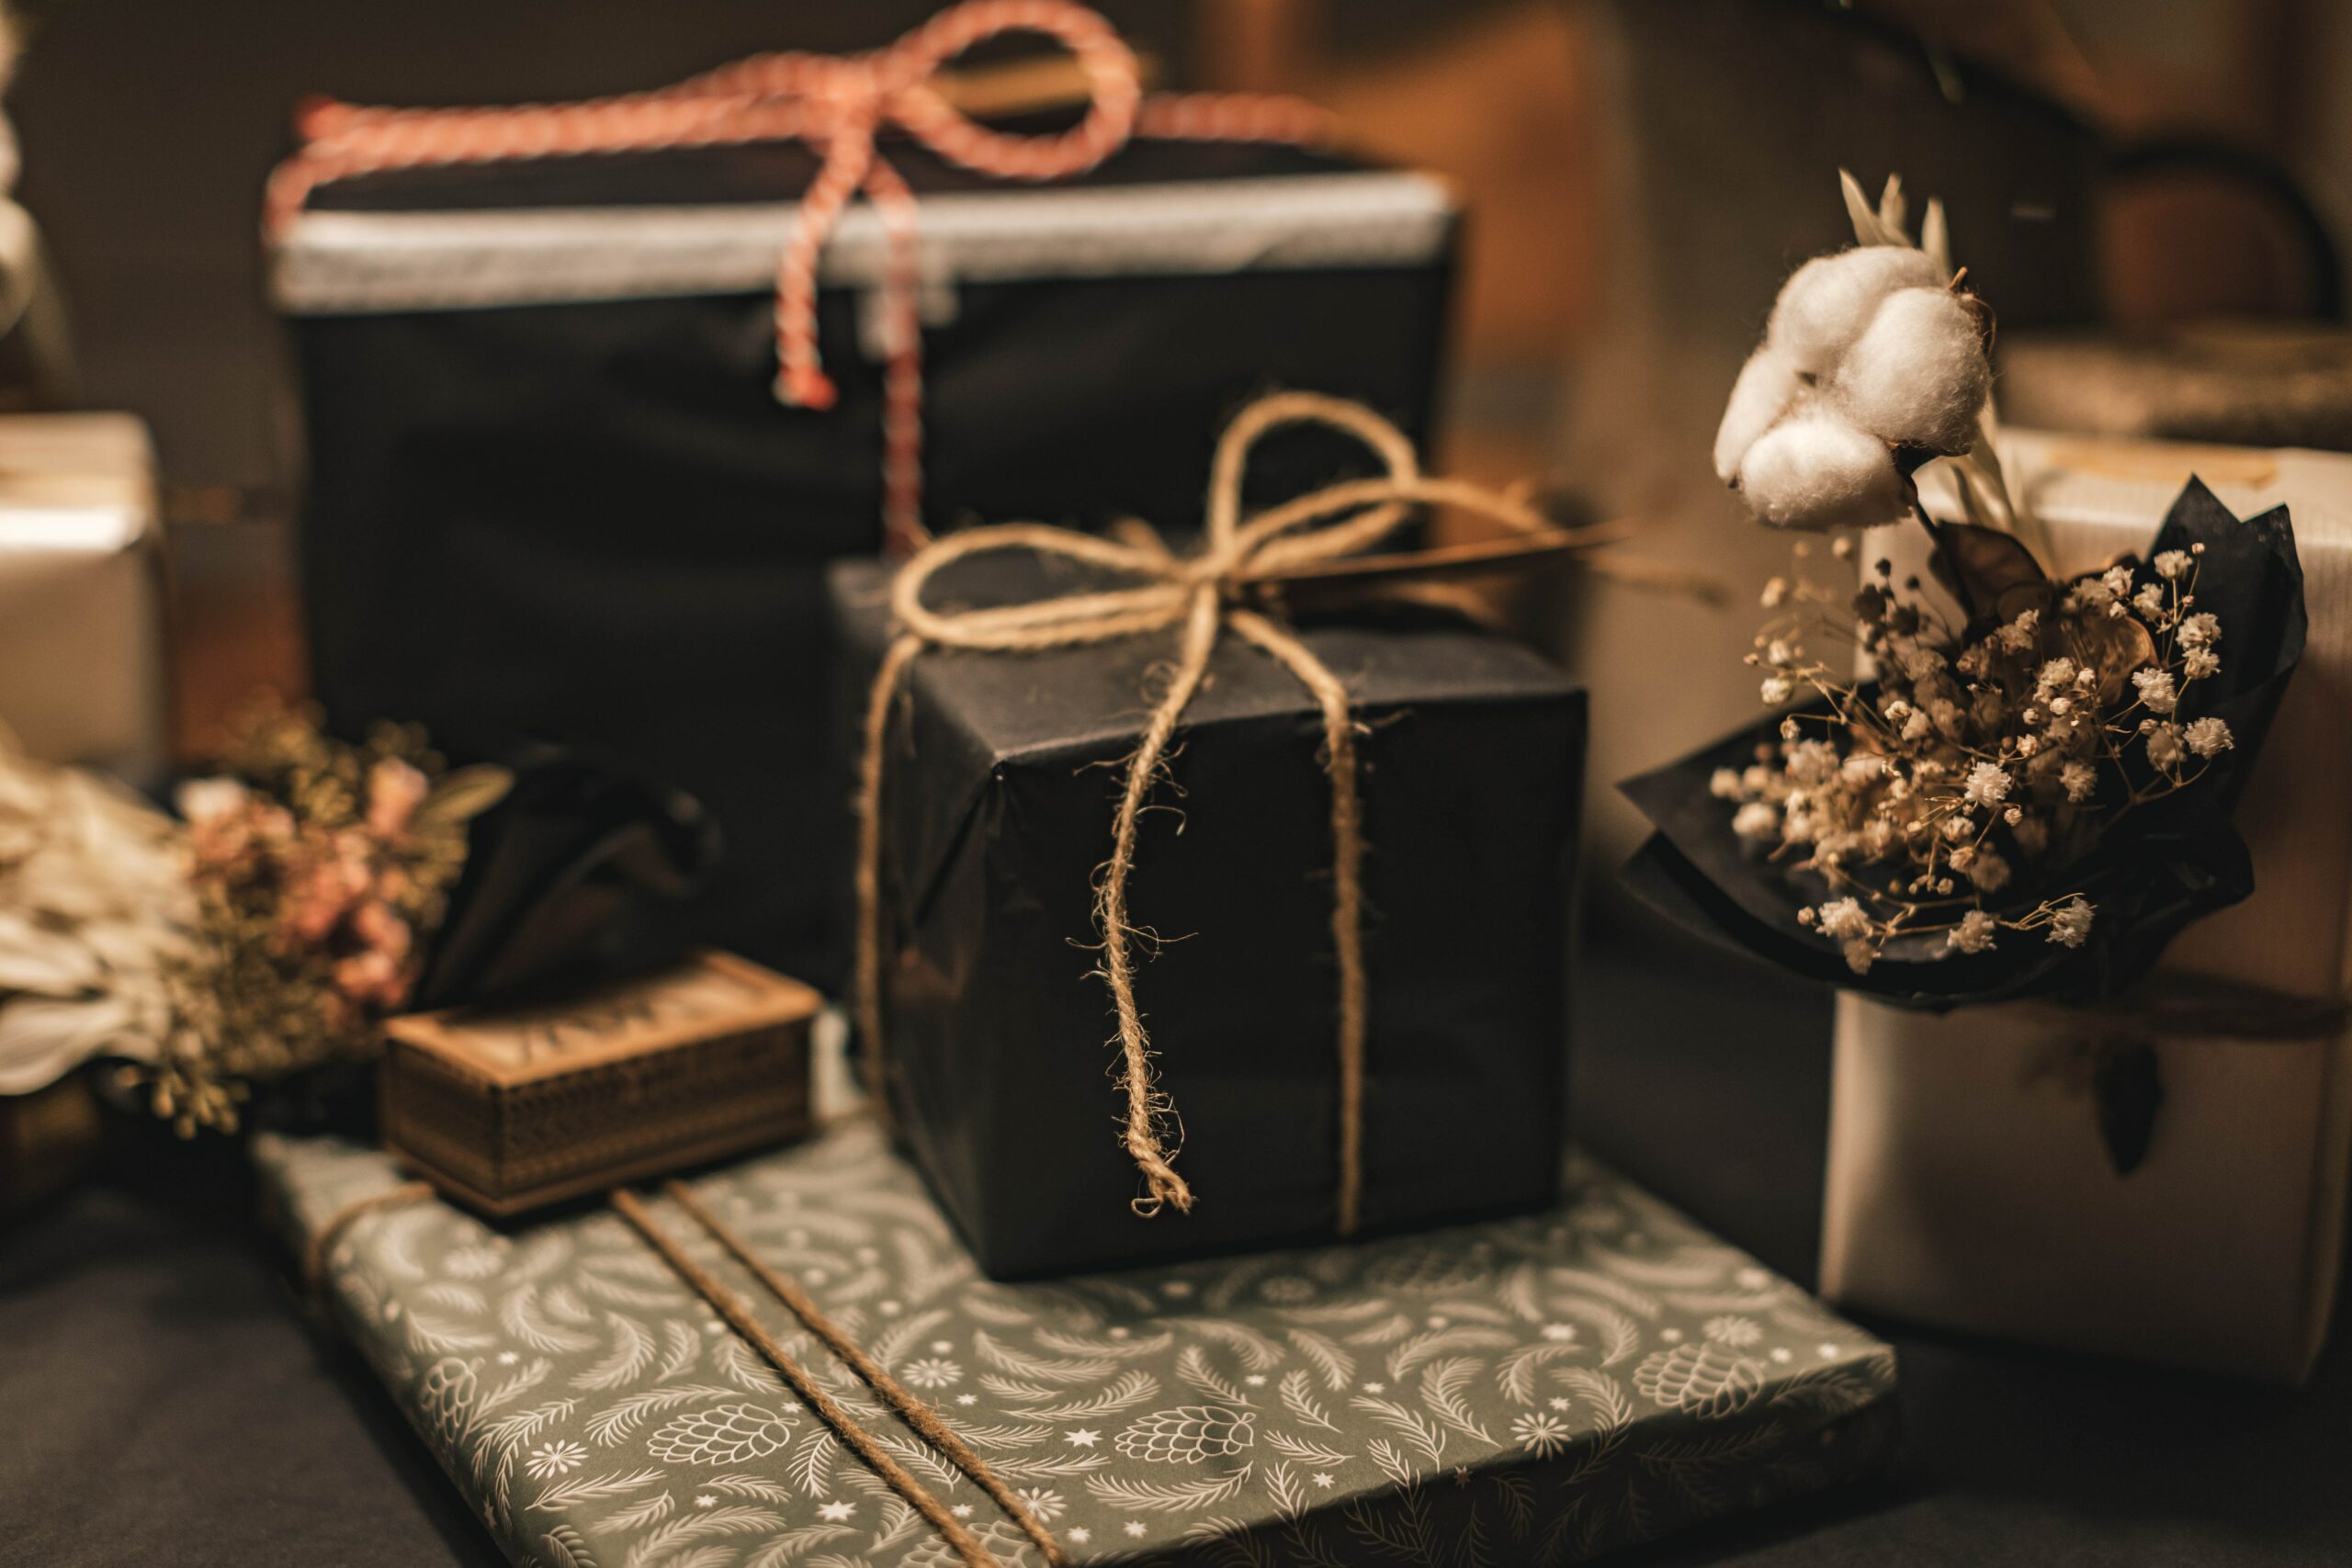 Two gifts in black wrapping paper and tied with twine sit beside cotton and other botanicals in a jar atop a counter.